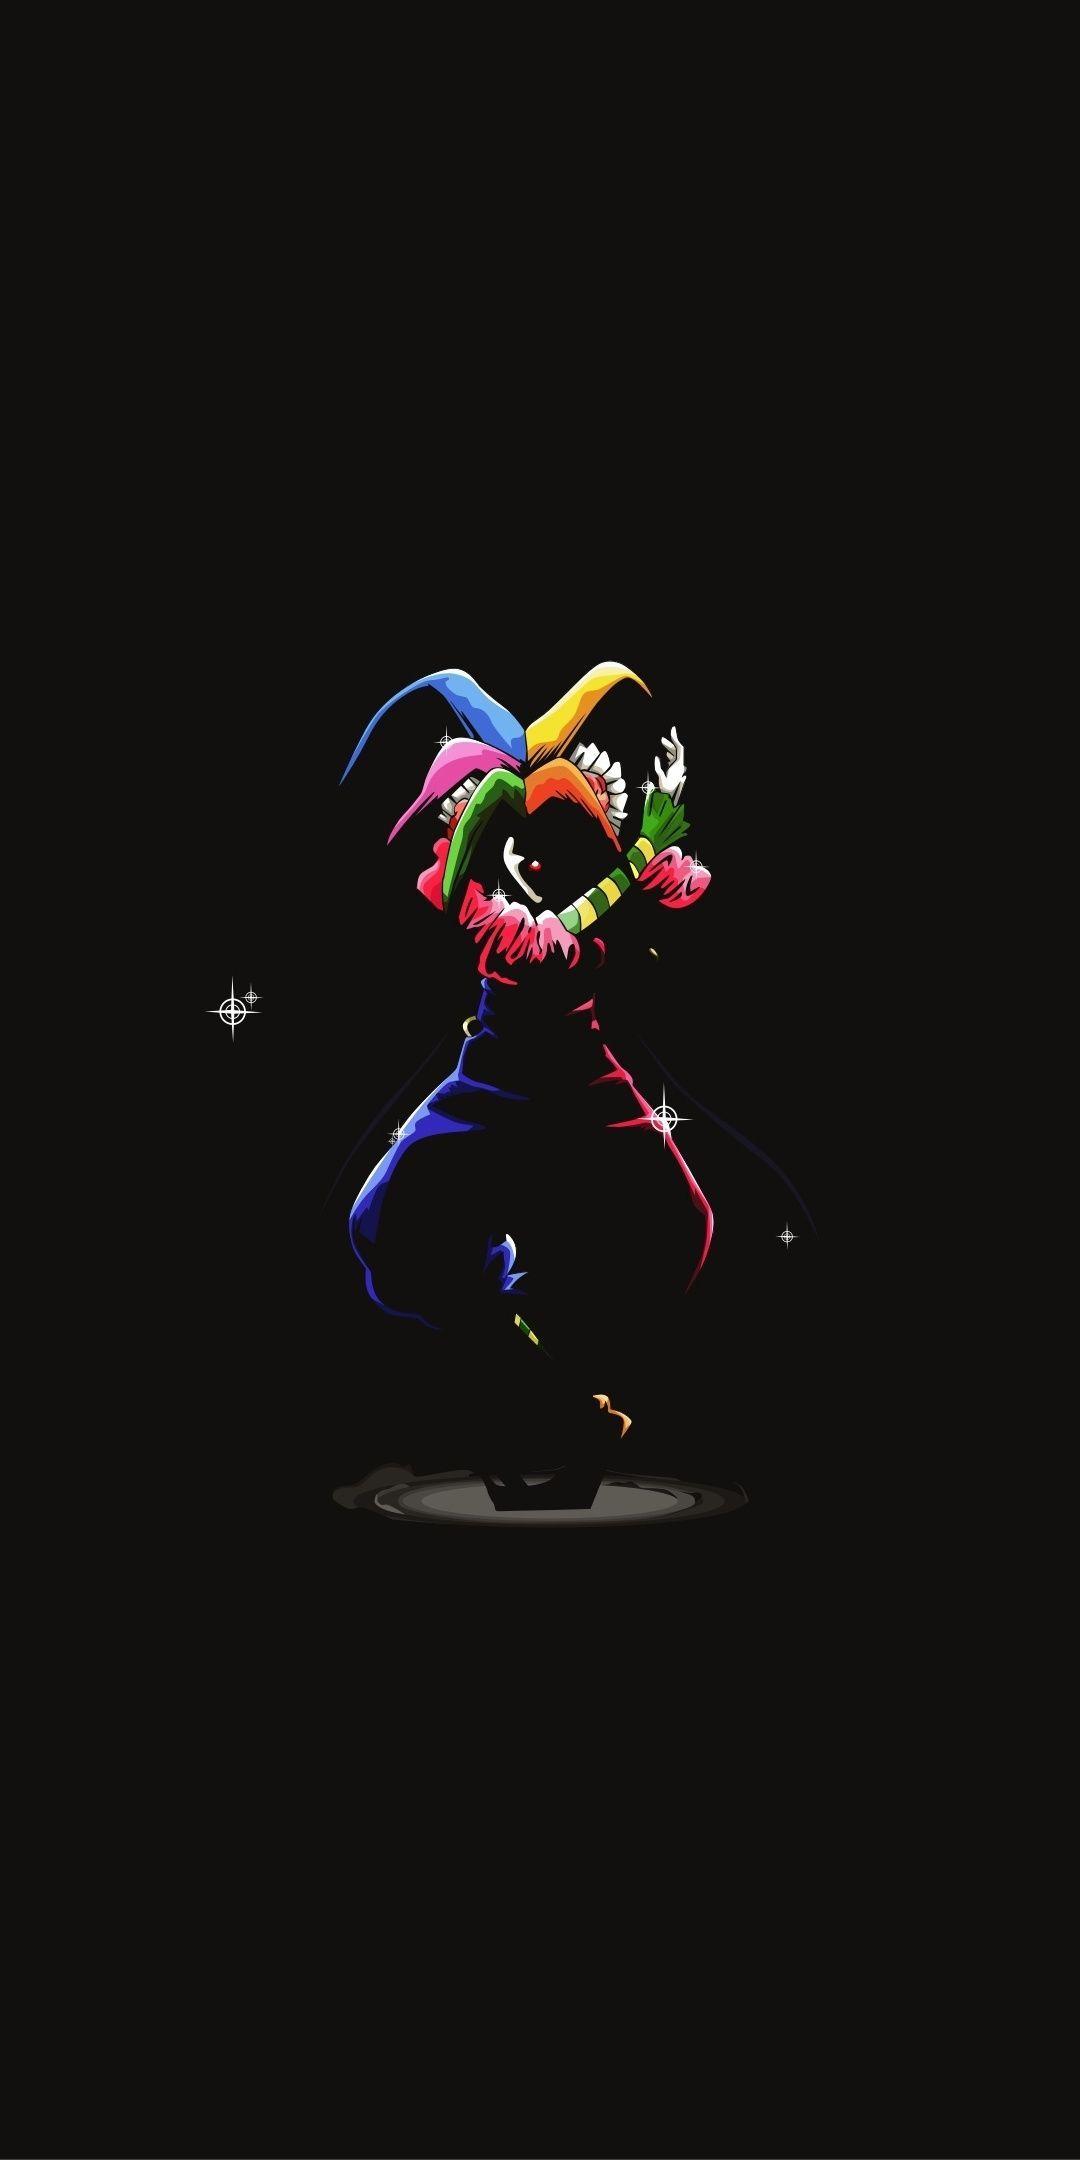 Fresh Cute Clown Ad Background Wallpaper Image For Free Download  Pngtree